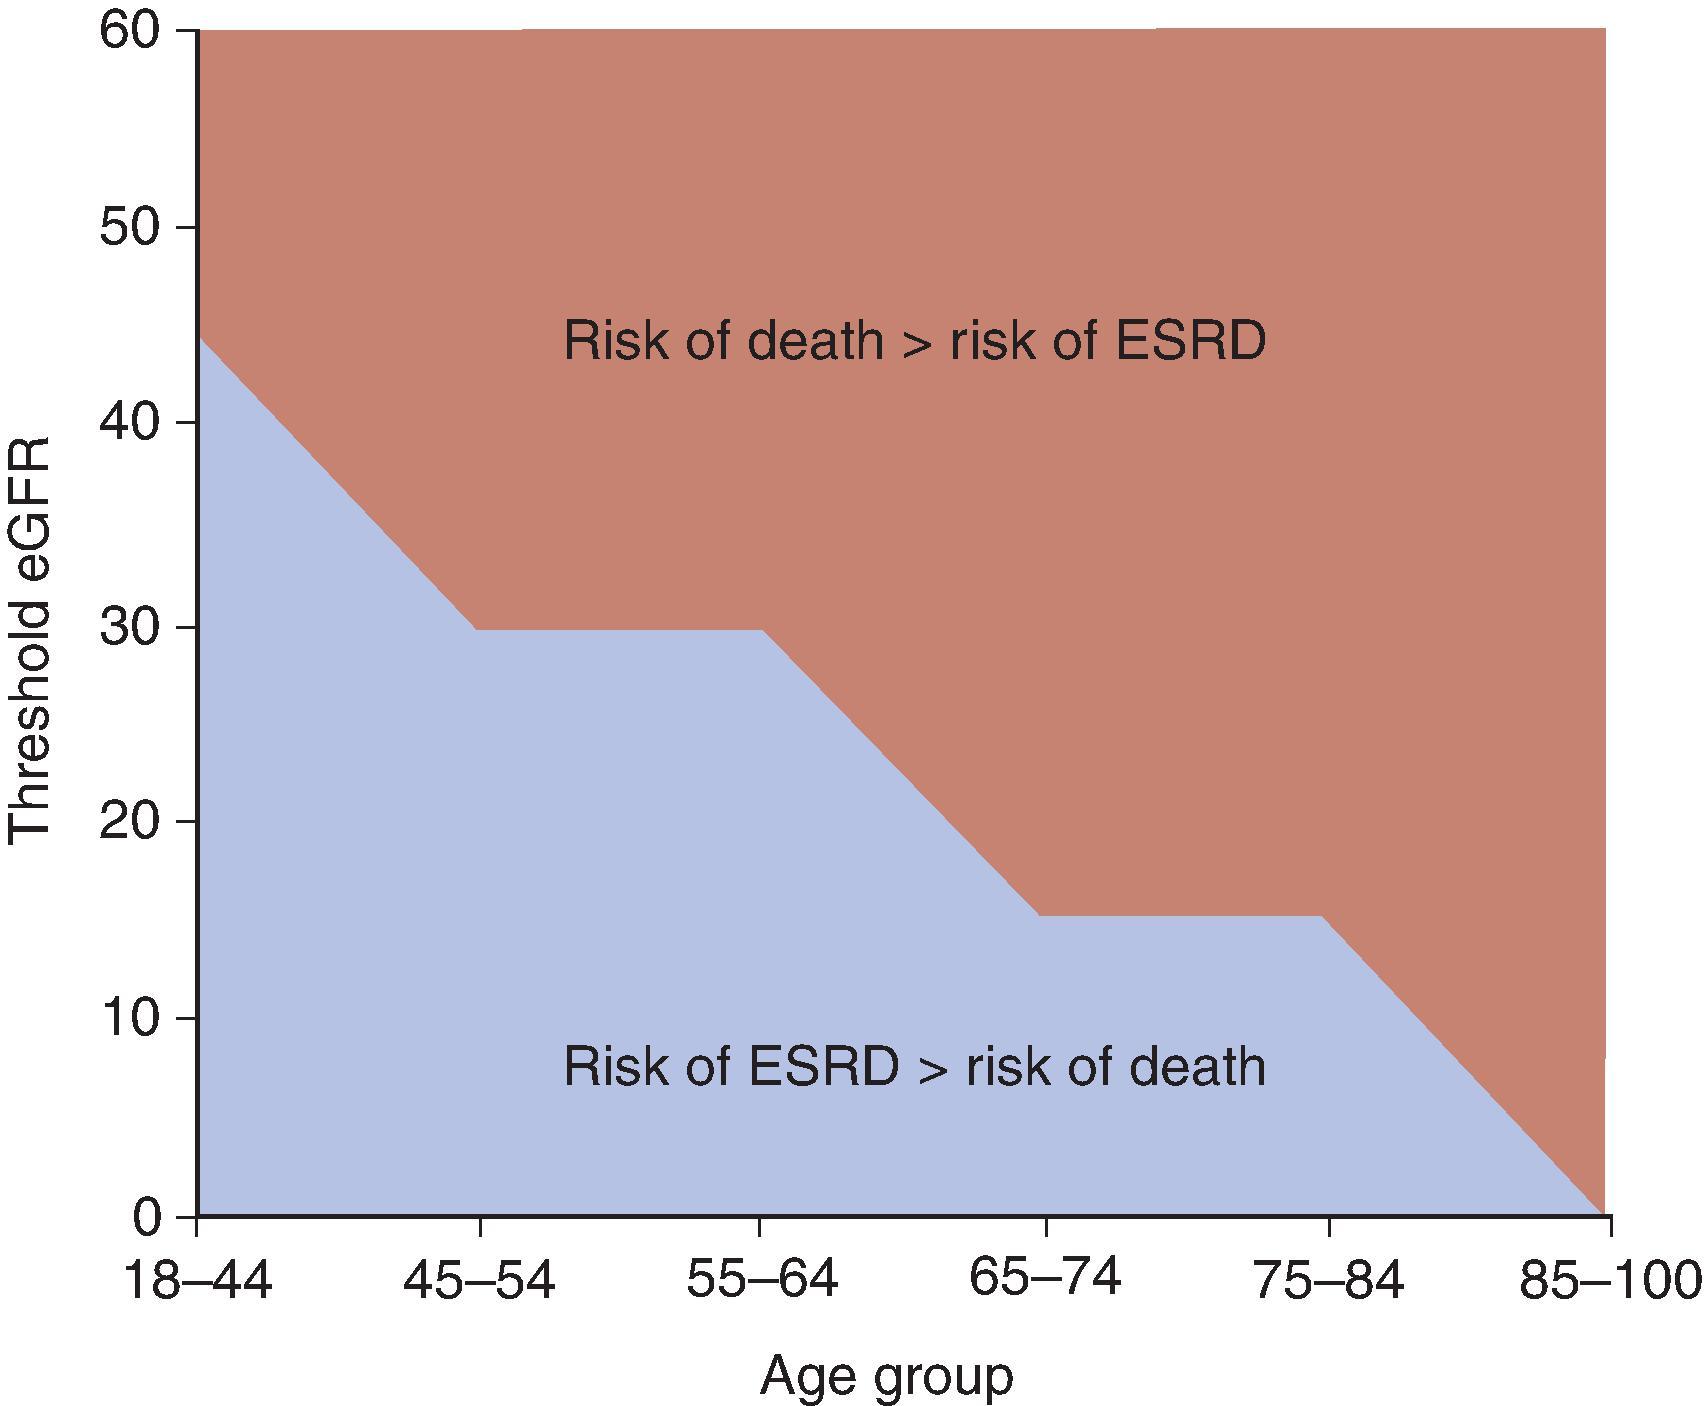 Fig. 48.3, Age differences in the threshold level of estimated glomerular filtration rate (eGFR), at which risk of end-stage renal disease (ESRD) exceeds risk of death among a US cohort of veterans. (From O’Hare AM, Choi AI, Bertenthal D, et al. Age affects outcomes in chronic kidney disease. J Am Soc Nephrol . 2007;18:2758–2765.)